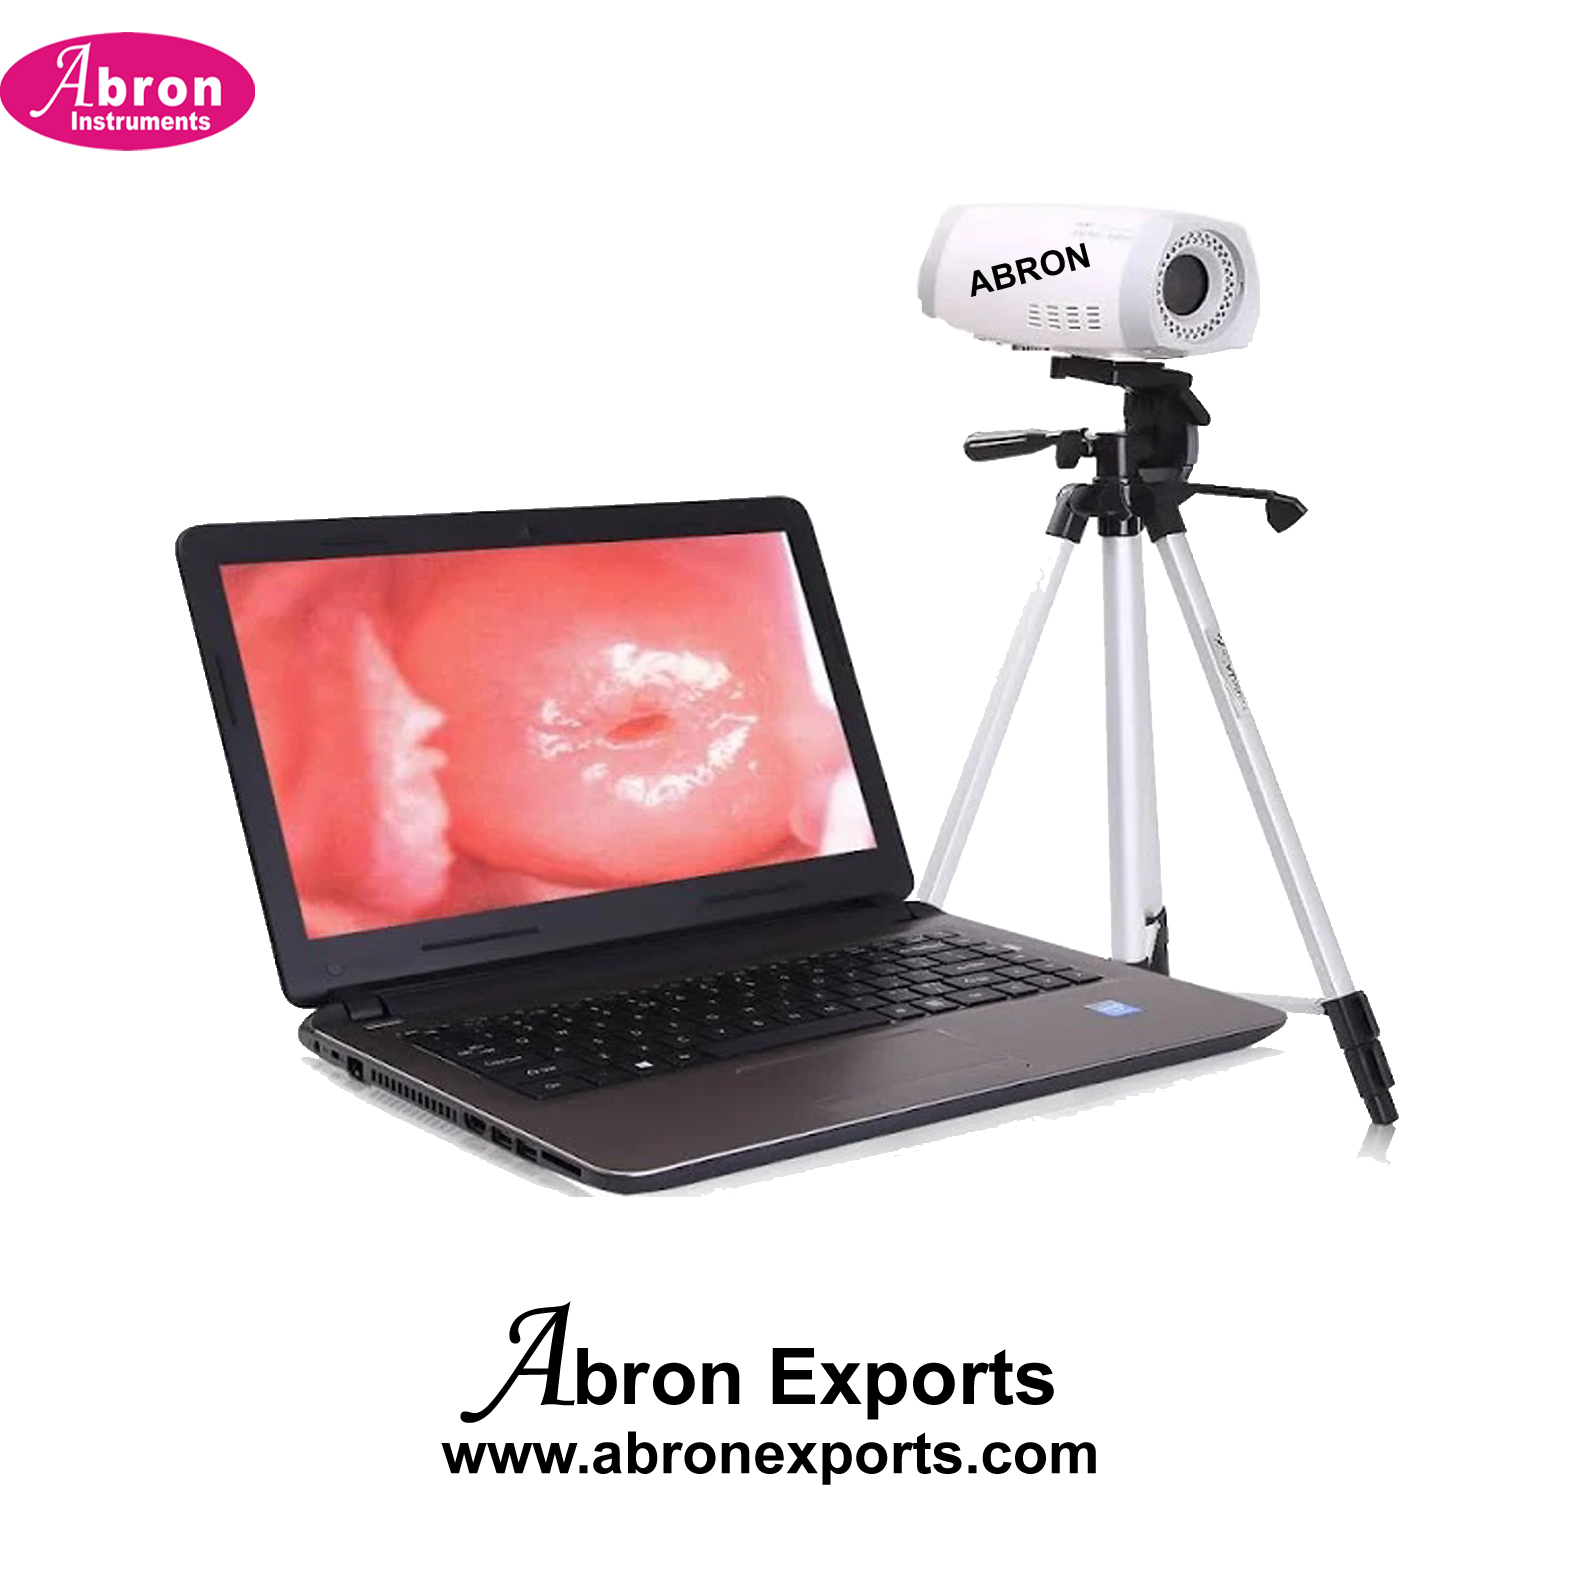 Gynecology Digital Video Colposcope with Reporting with continuous zoom to 40x with outputs Abron ABM-2904A40X